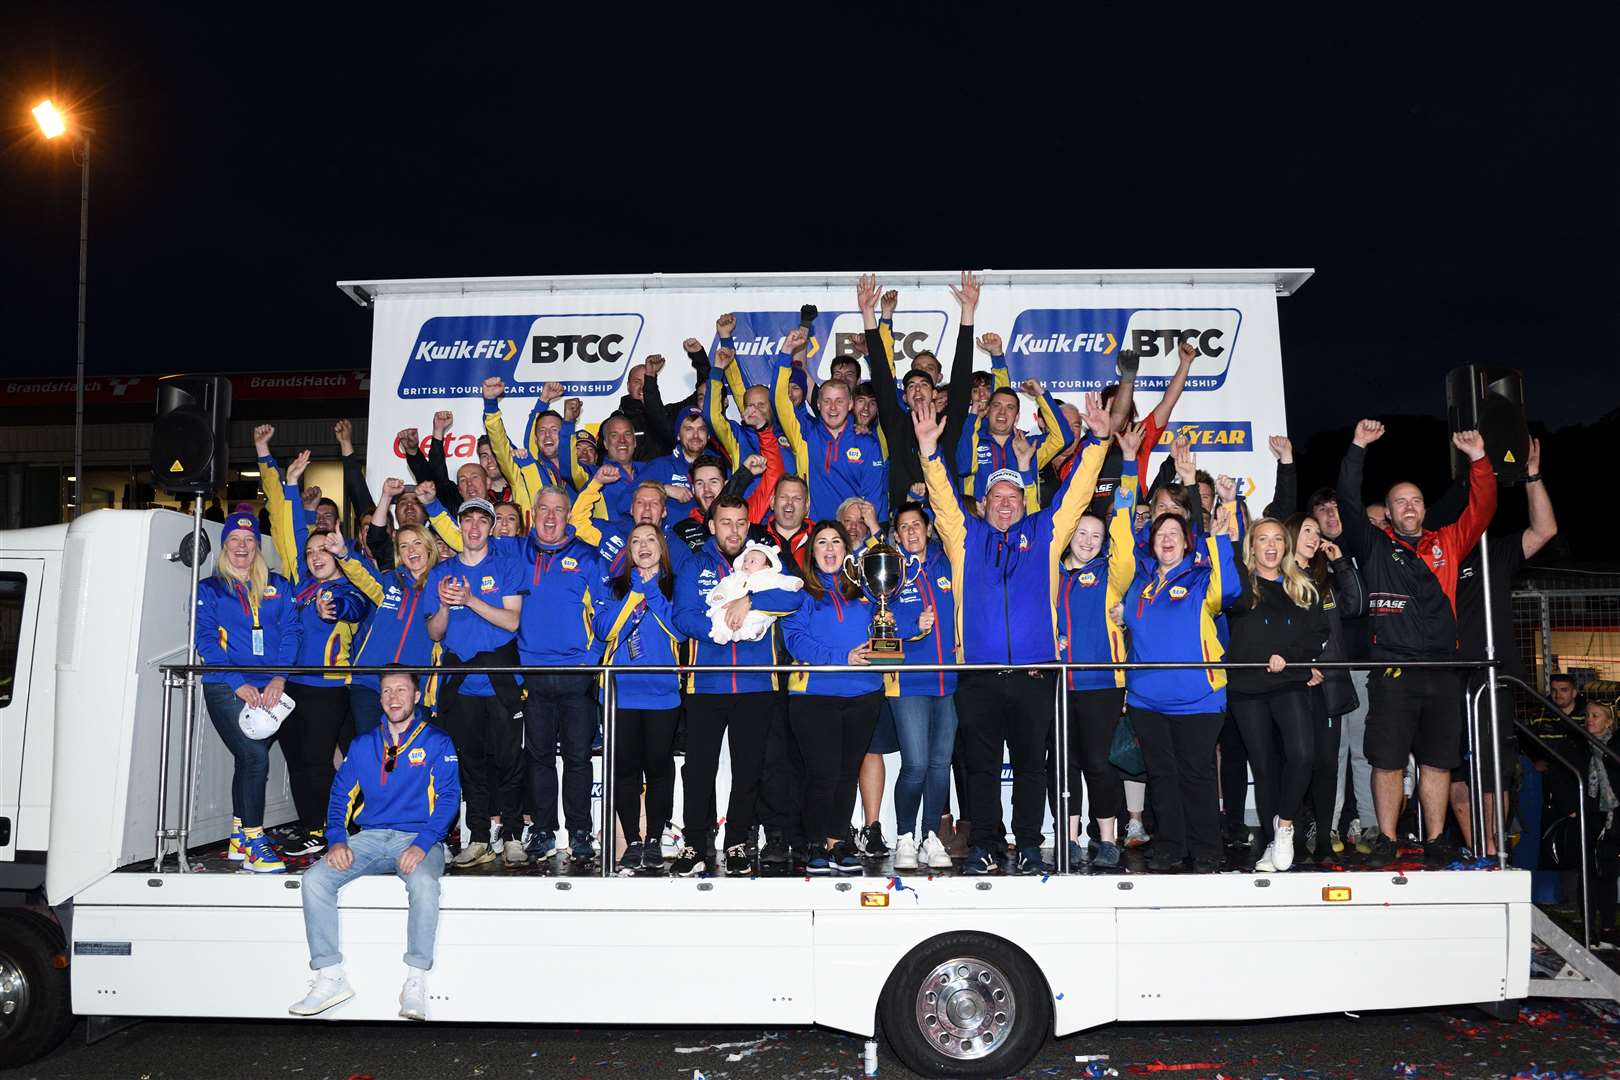 Wrotham-based Motorbase Performance, running under the NAPA Racing UK banner, narrowly missed out on its first overall drivers' title with Ash Sutton, but did score victory in the teams' championship